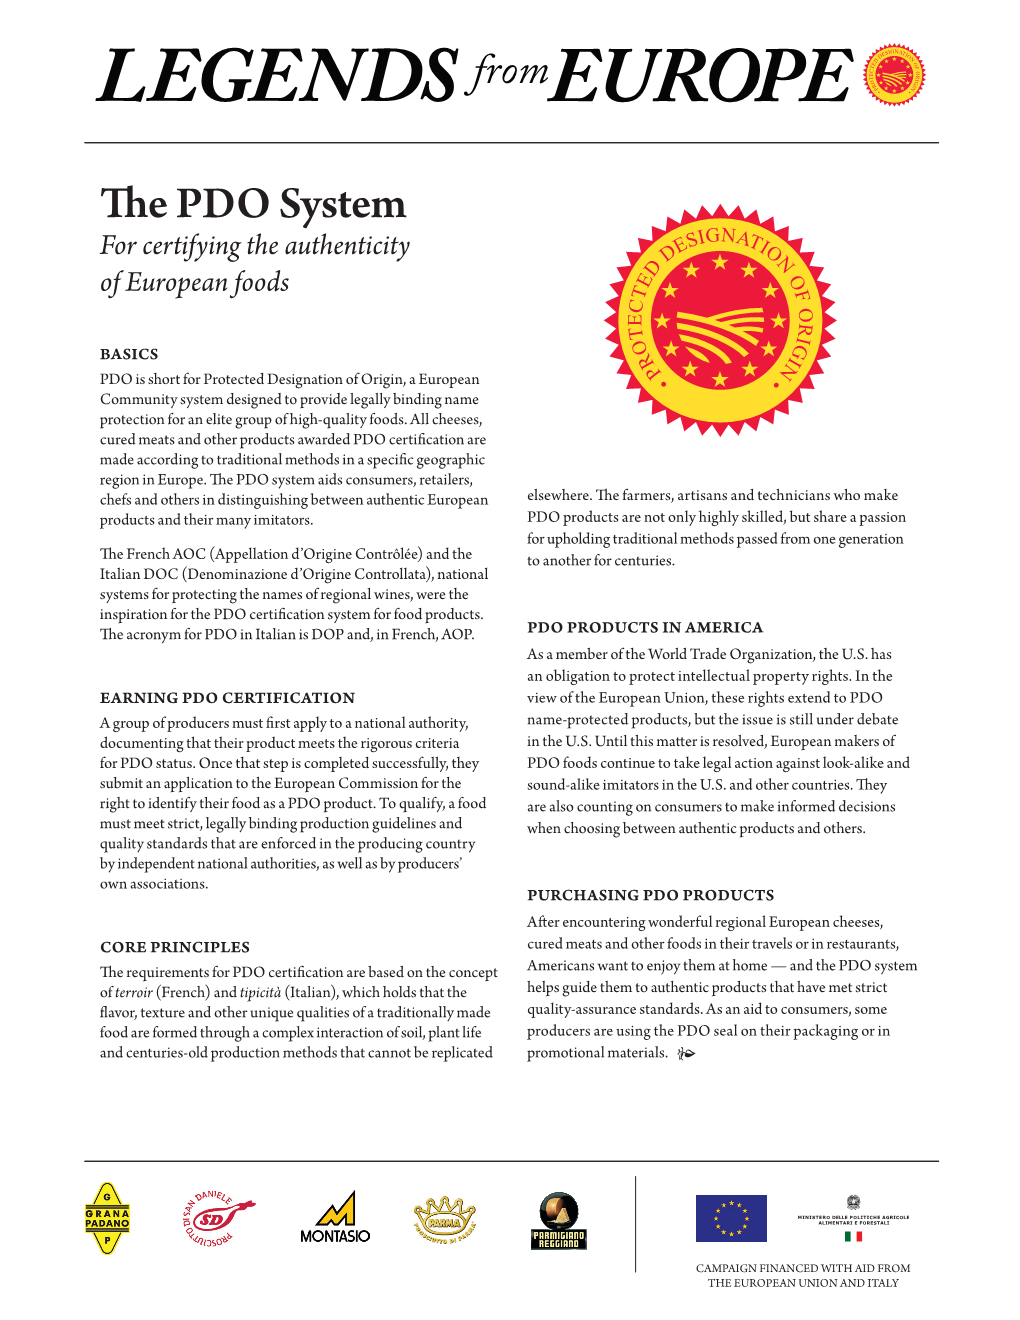 The PDO System For Certifying the Authenticity of European Foods